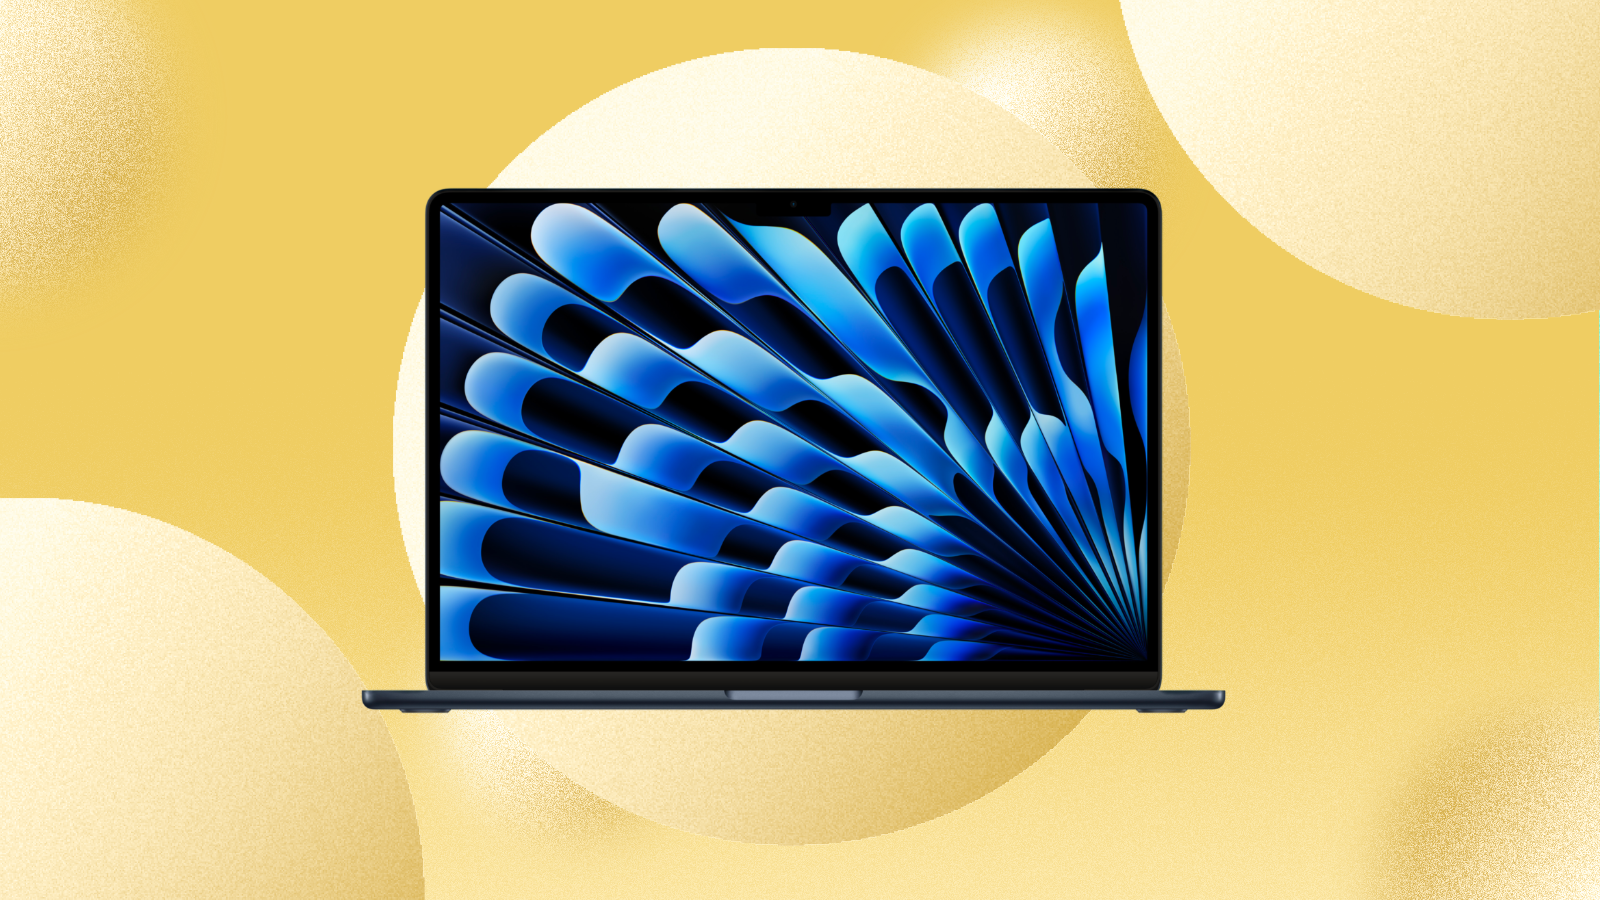 https://www.cnet.com/a/img/hub/2023/06/08/04d6f2f9-4c1b-4037-806b-be303dab6ab2/macbook-air-15-inch-midnight.png